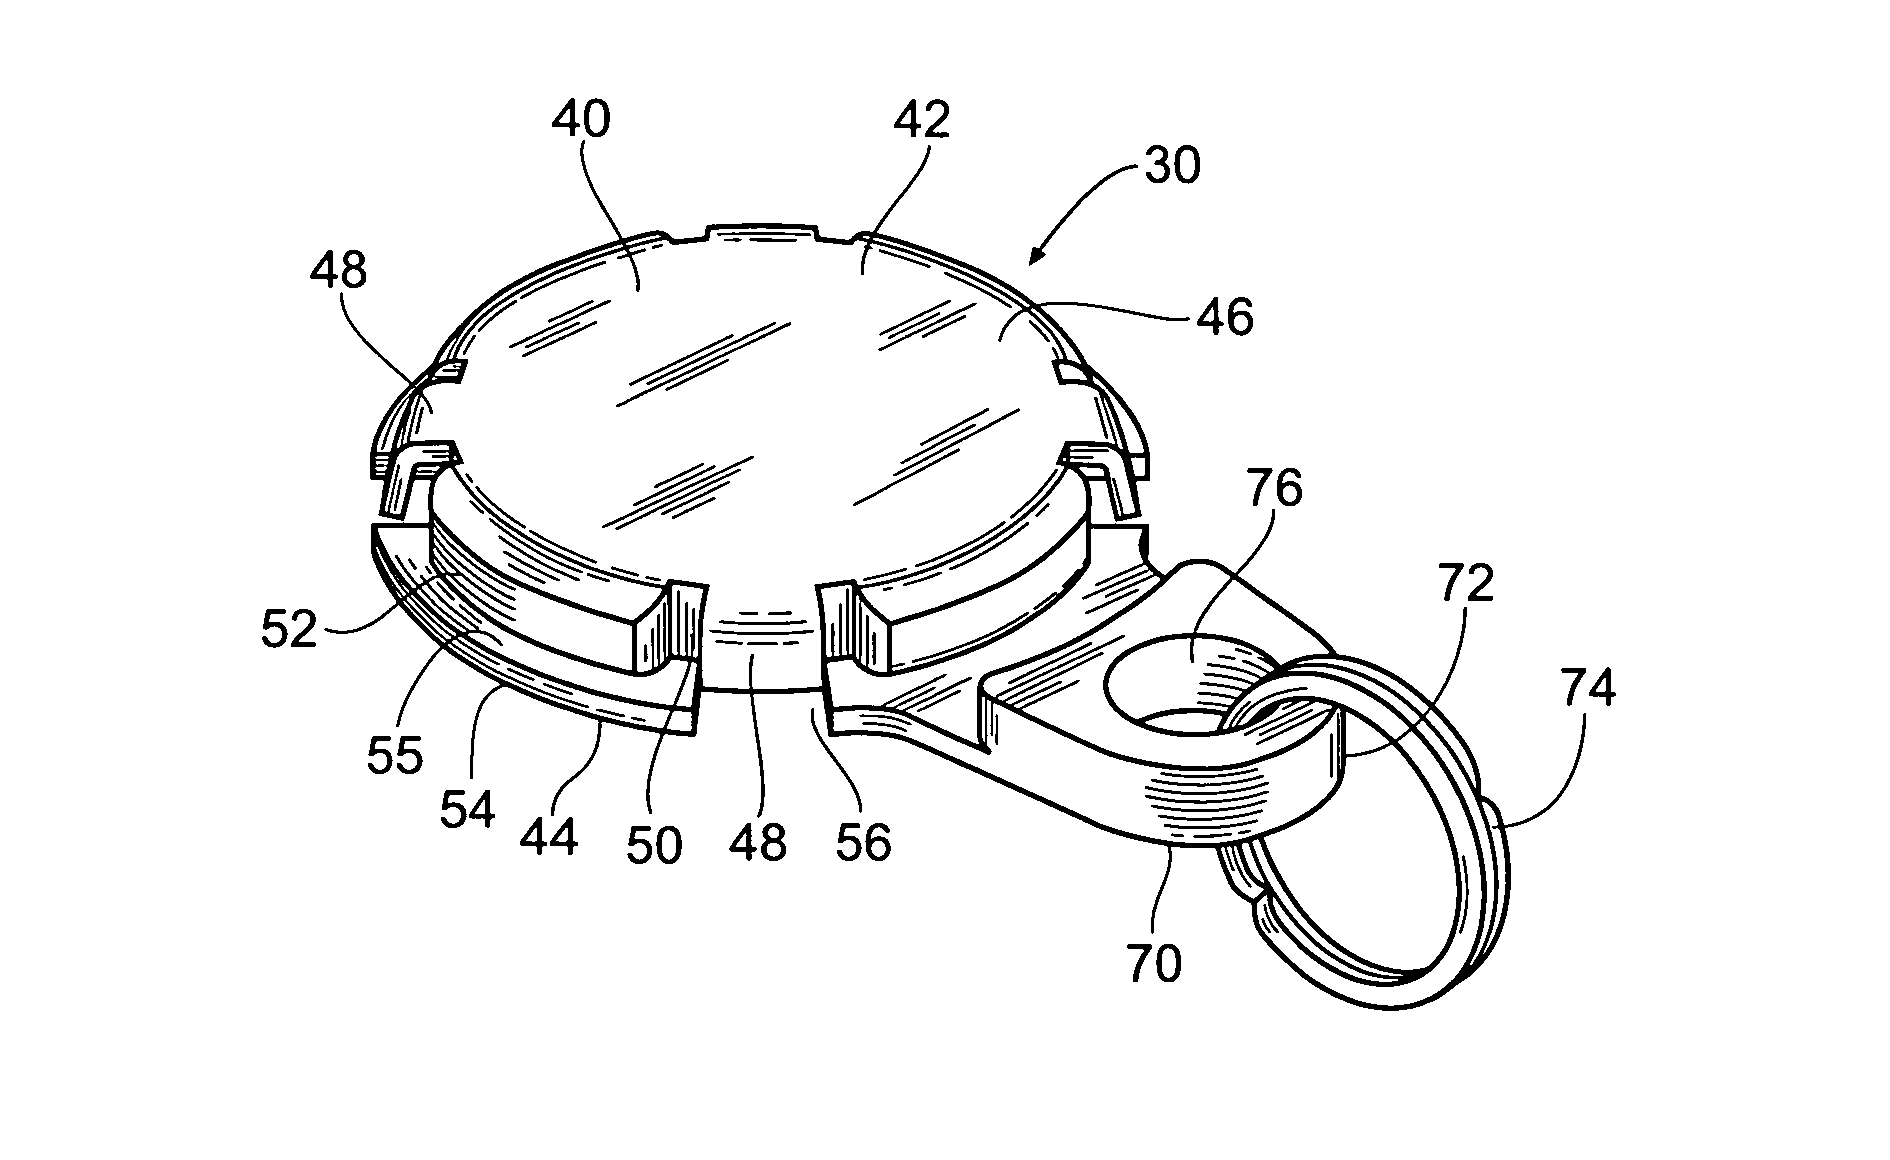 Button engaging and attachment apparatus and methods related applications